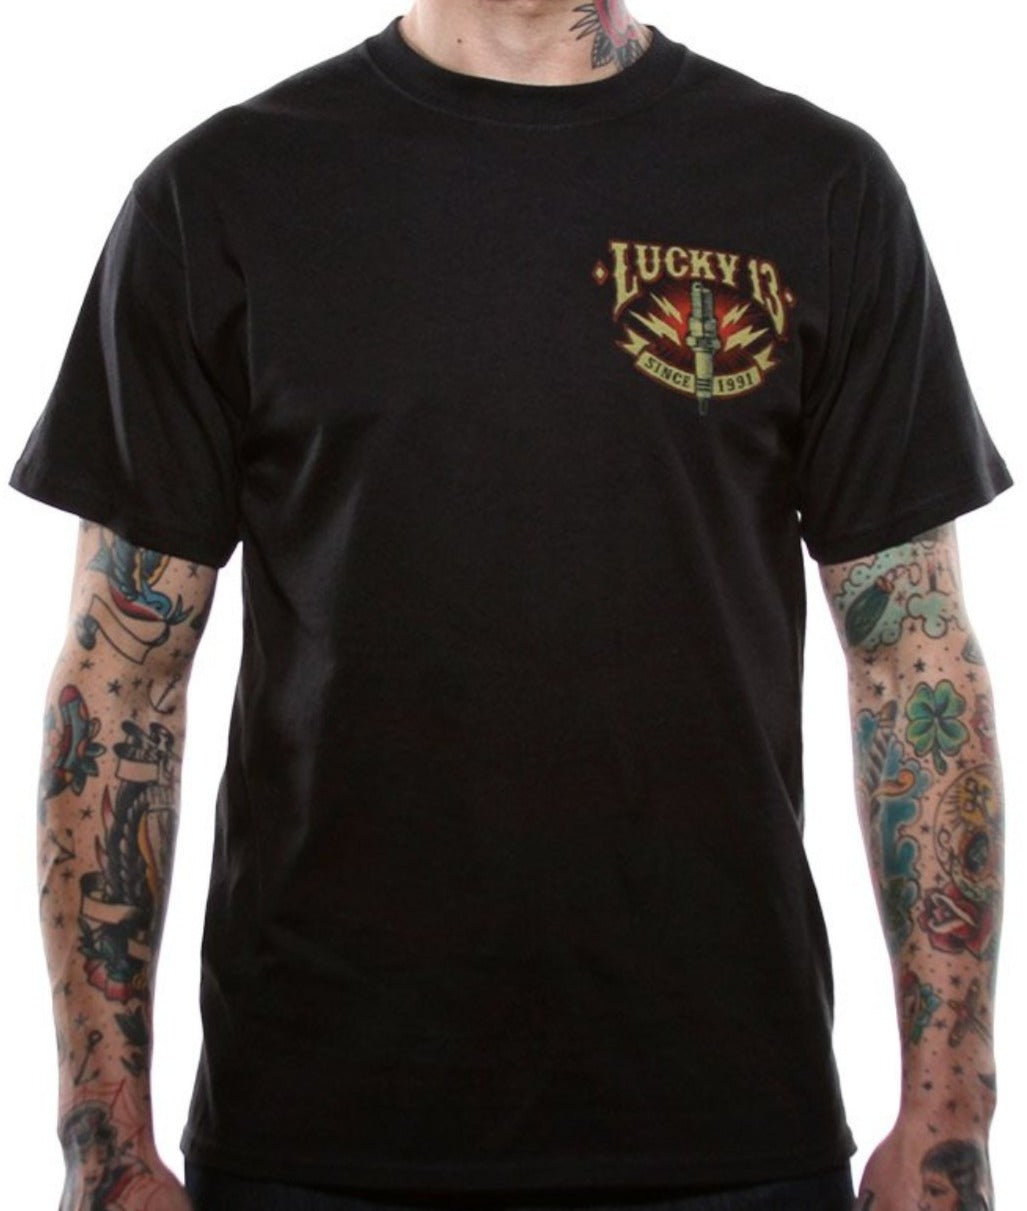 The AMPED Tee - NOW AVAILABLE IN SIZE 5XL!